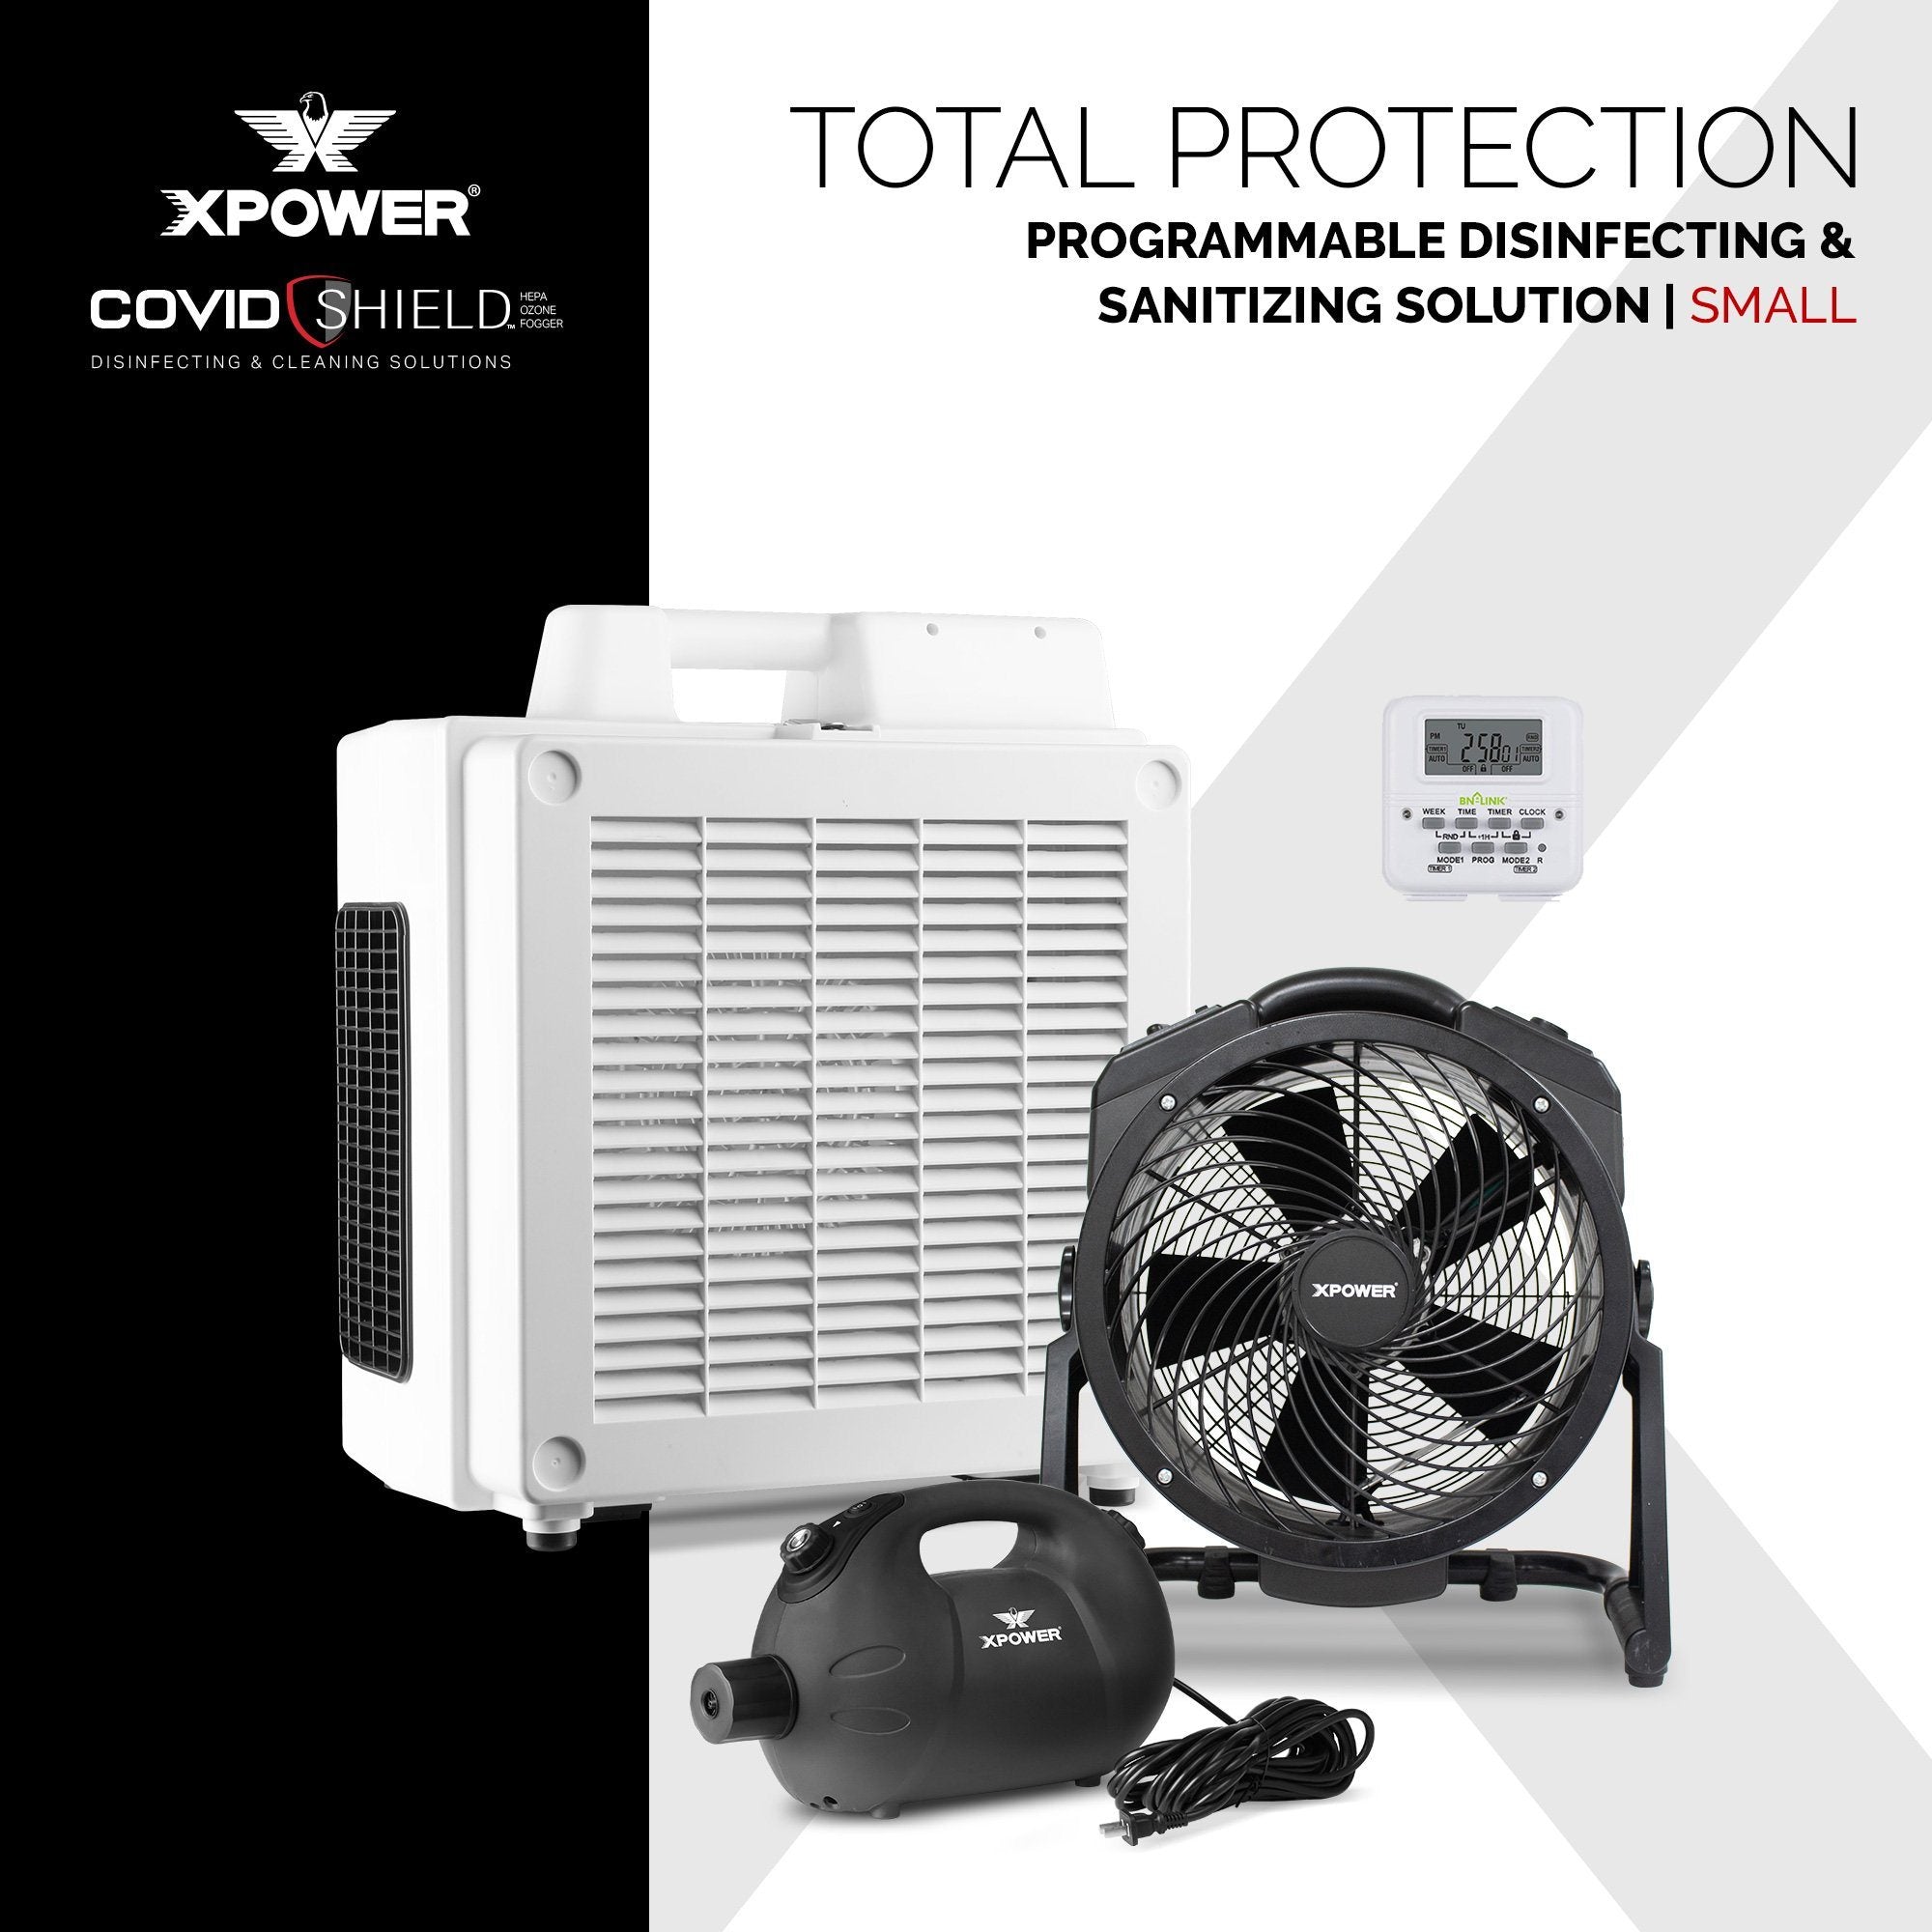 XPOWER Total Protection – Programmable Disinfecting & Sanitizing Solution